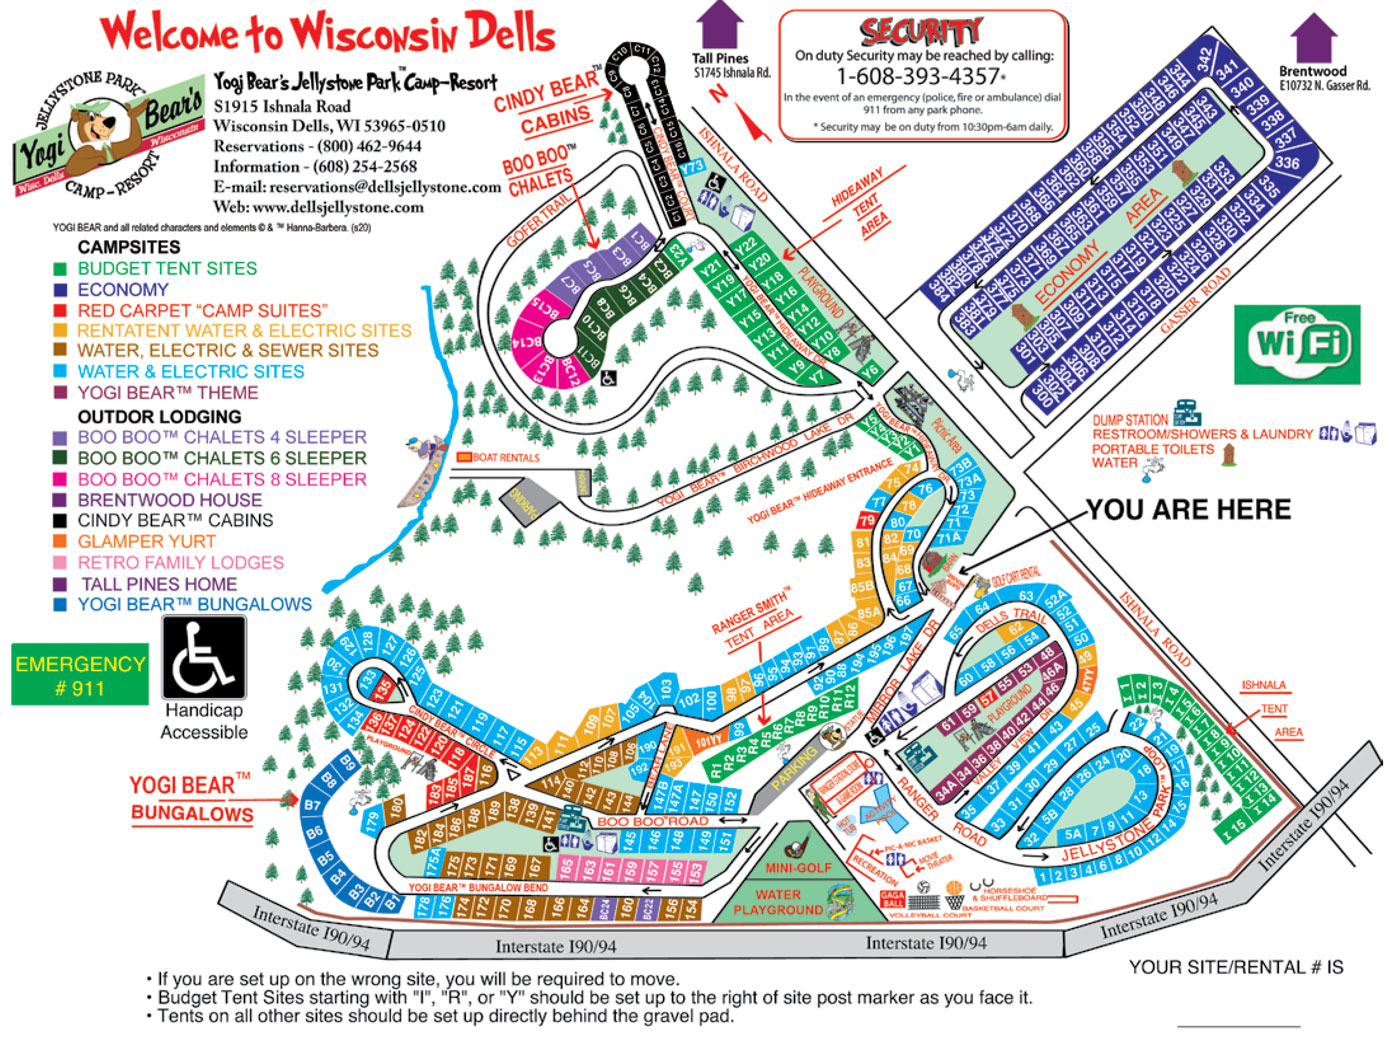 Click here to see larger Resort Map